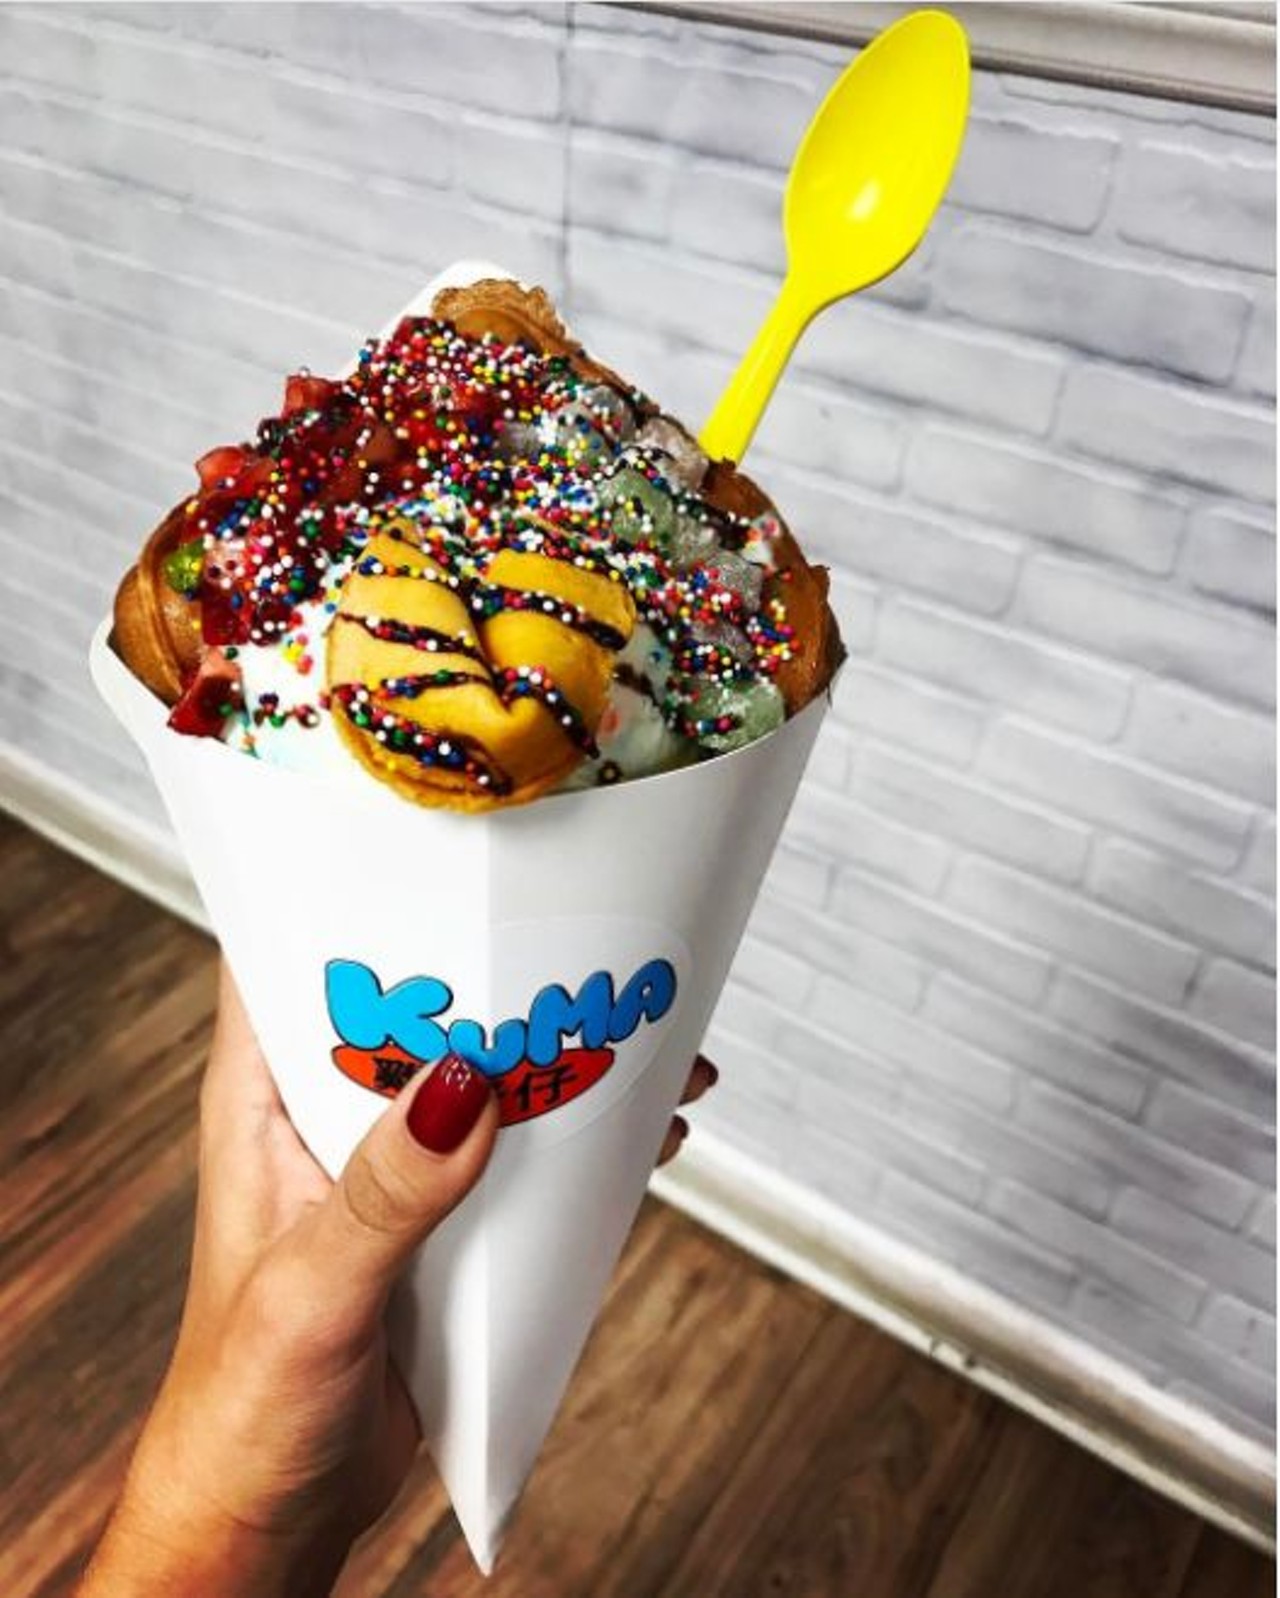 Hong Kong Waffle from Kuma
6565 Babcock Road
But if you need a bigger dose of sugar, you&#146;ll want to get in line at Kuma where the Hong Kong waffles are made fresh and topped with all manners of tapioca, drizzles, Pocky and fixin&#146;s. 
Photo via Instagram, champagnelindsay